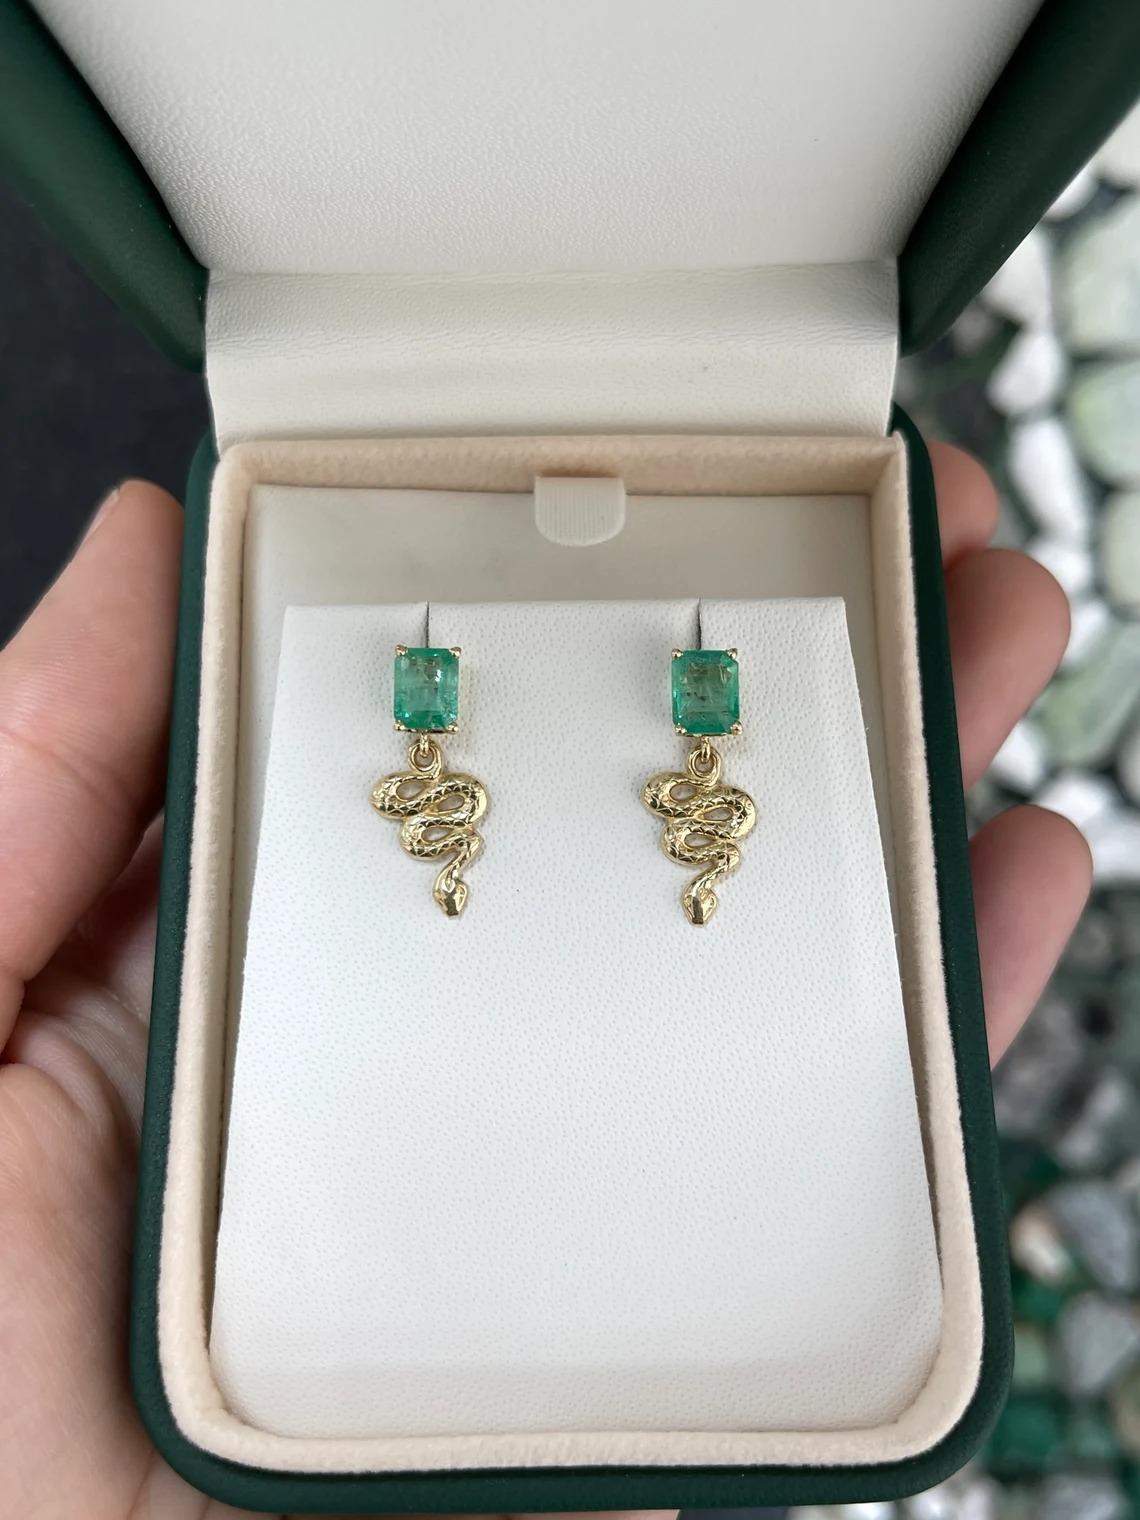 These captivating emerald stud earrings feature emeralds with a combined weight of 2.10 carats. The emeralds showcase an emerald cut, displaying a mesmerizing medium green color and unique characteristics that enhance their allure. Set in a secure